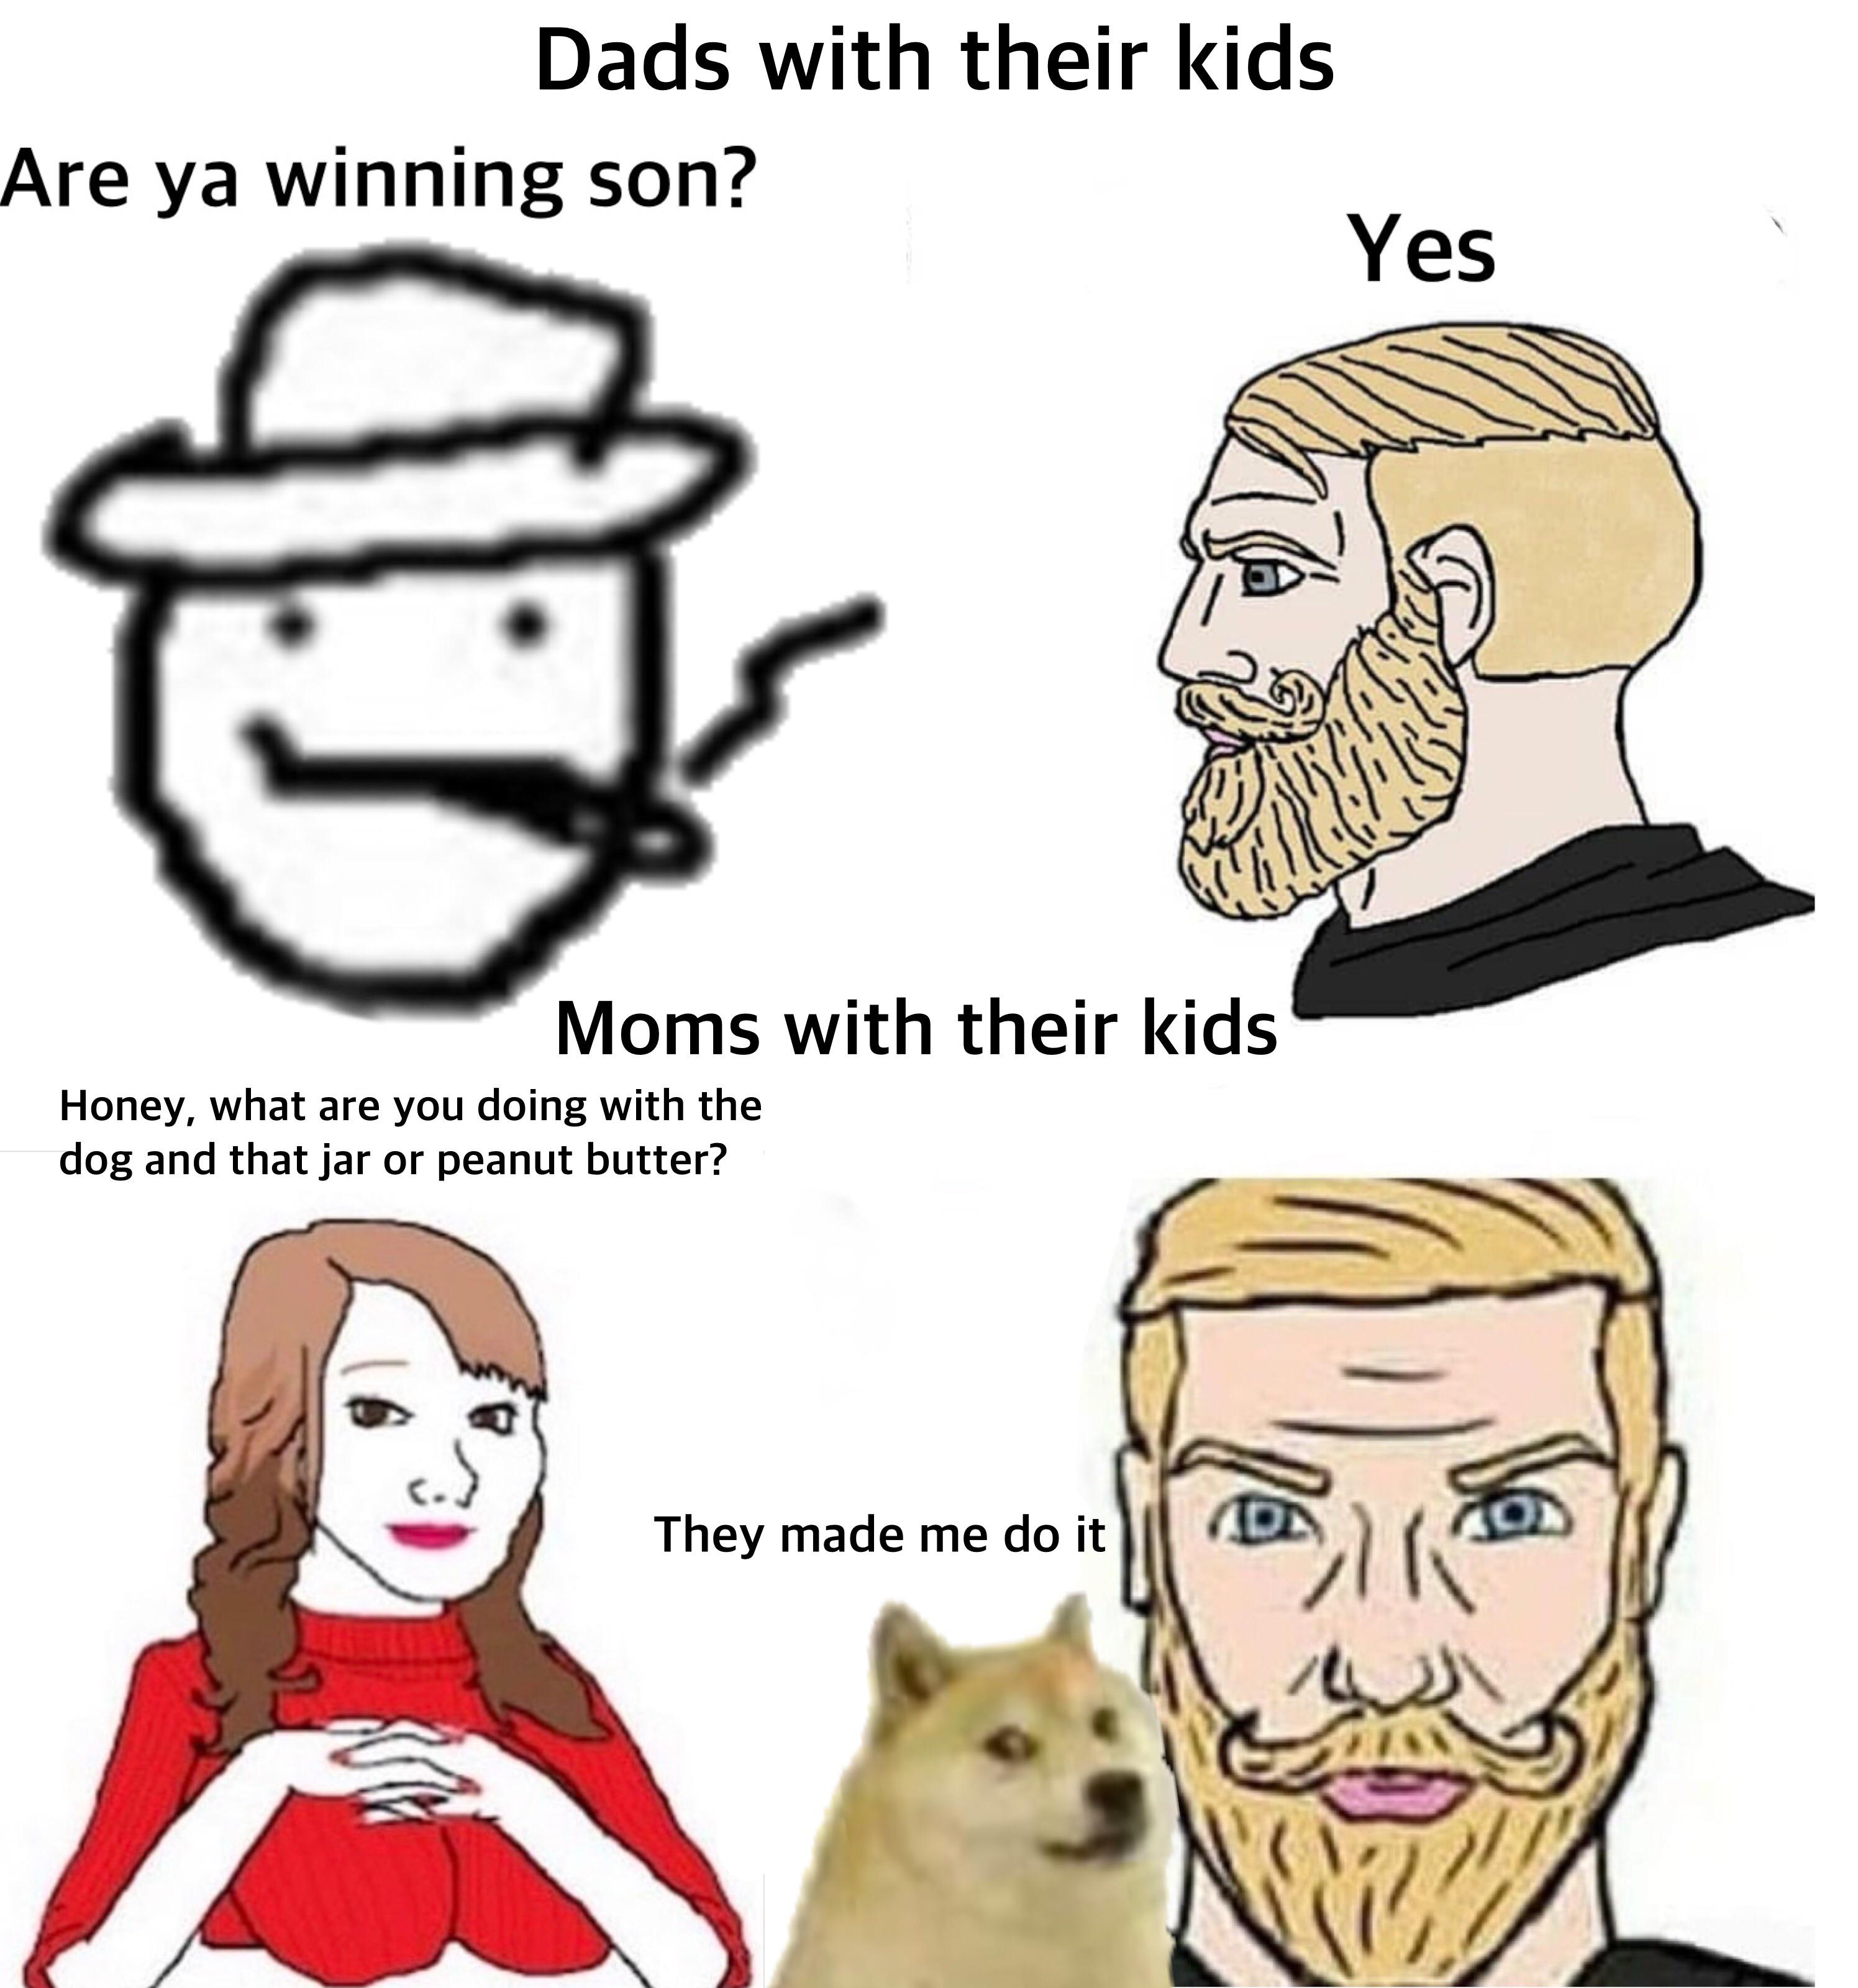 reddit dank memes 2020 - you winning son meme - Dads with their kids Are ya winning son? Yes Moms with their kids Honey, what are you doing with the dog and that jar or peanut butter? They made me do it